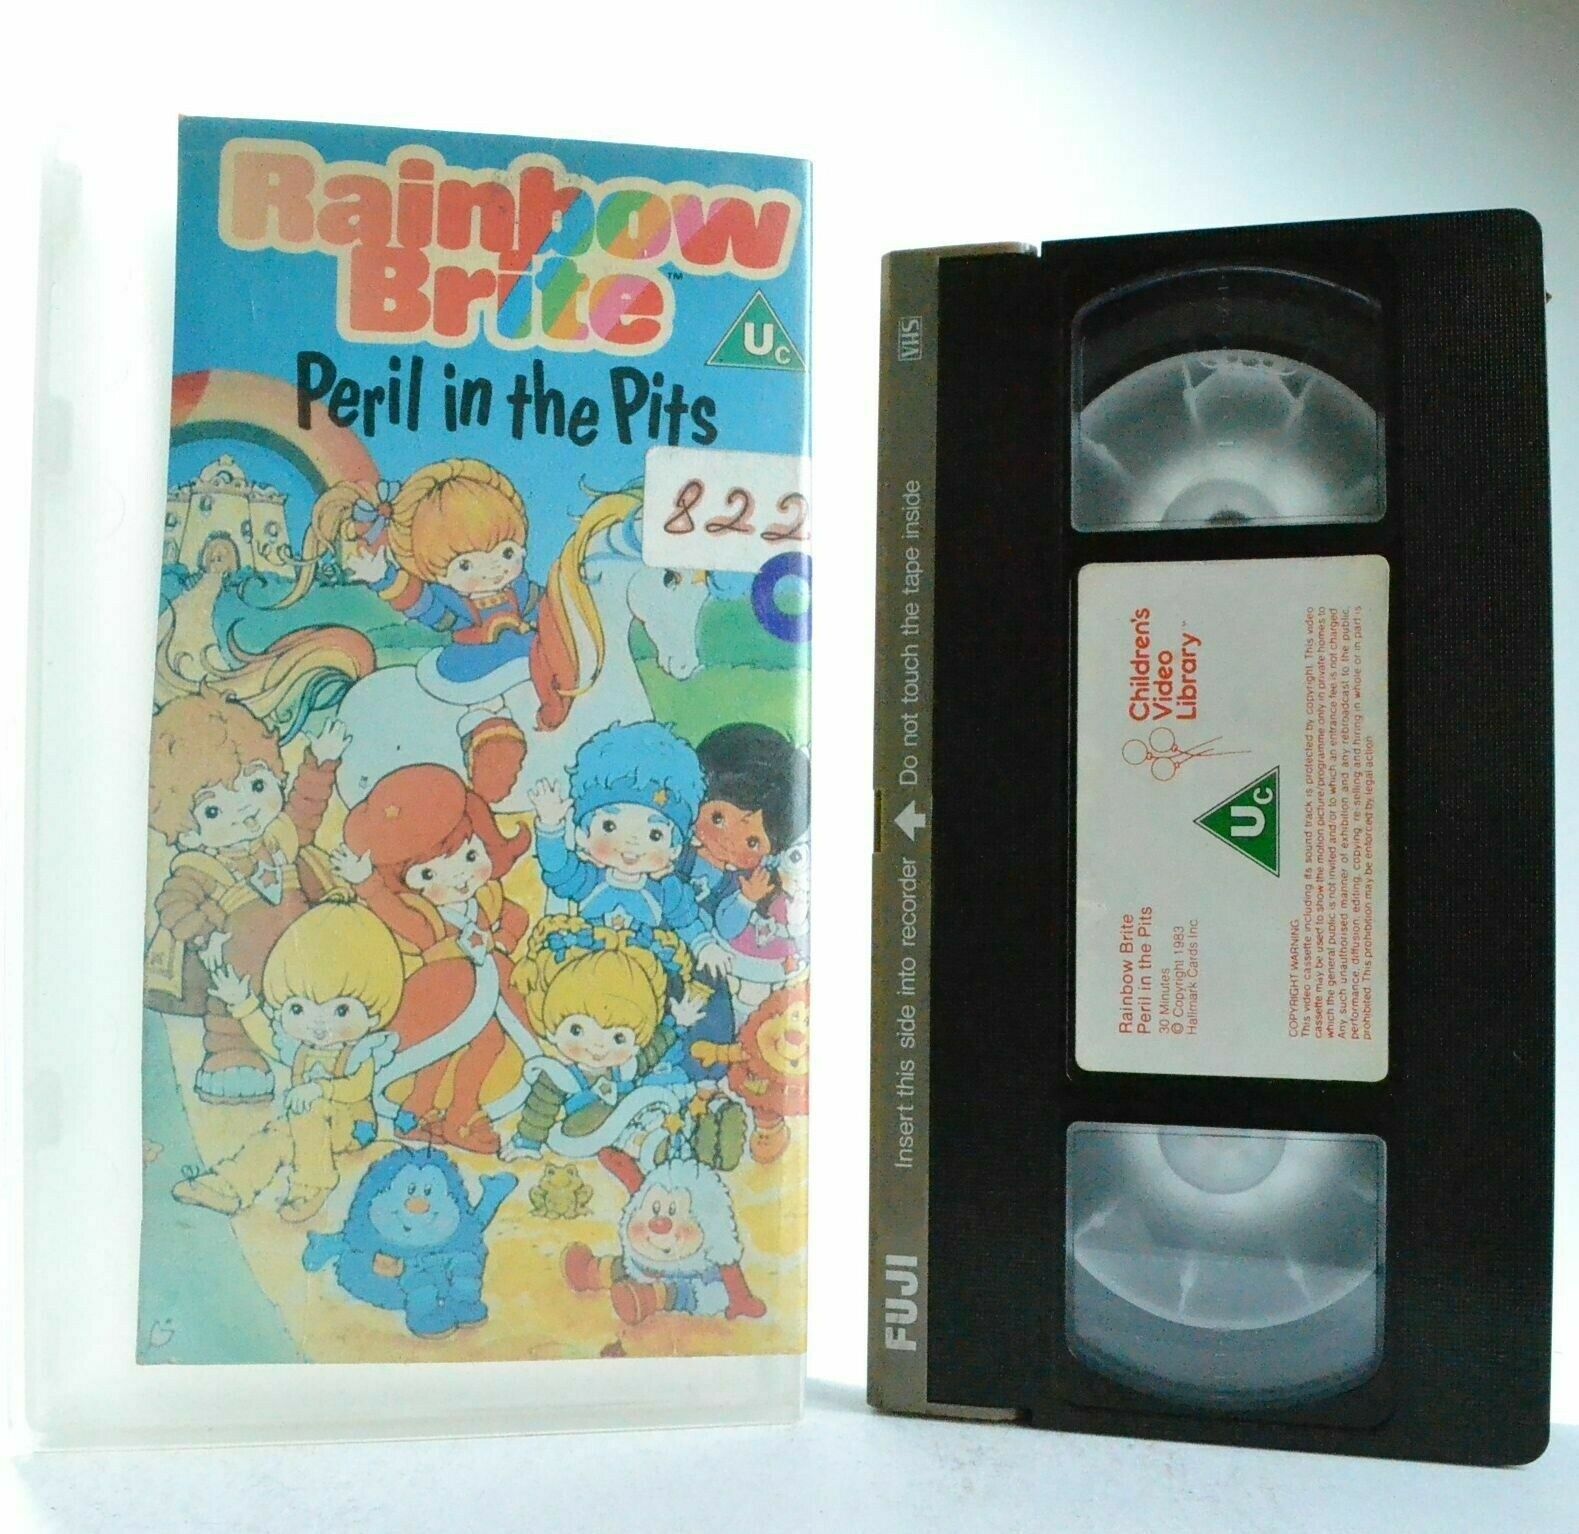 Rainbow Brite: Peril In The Pits (2nd Episode) Animation - Children's - Pal VHS-